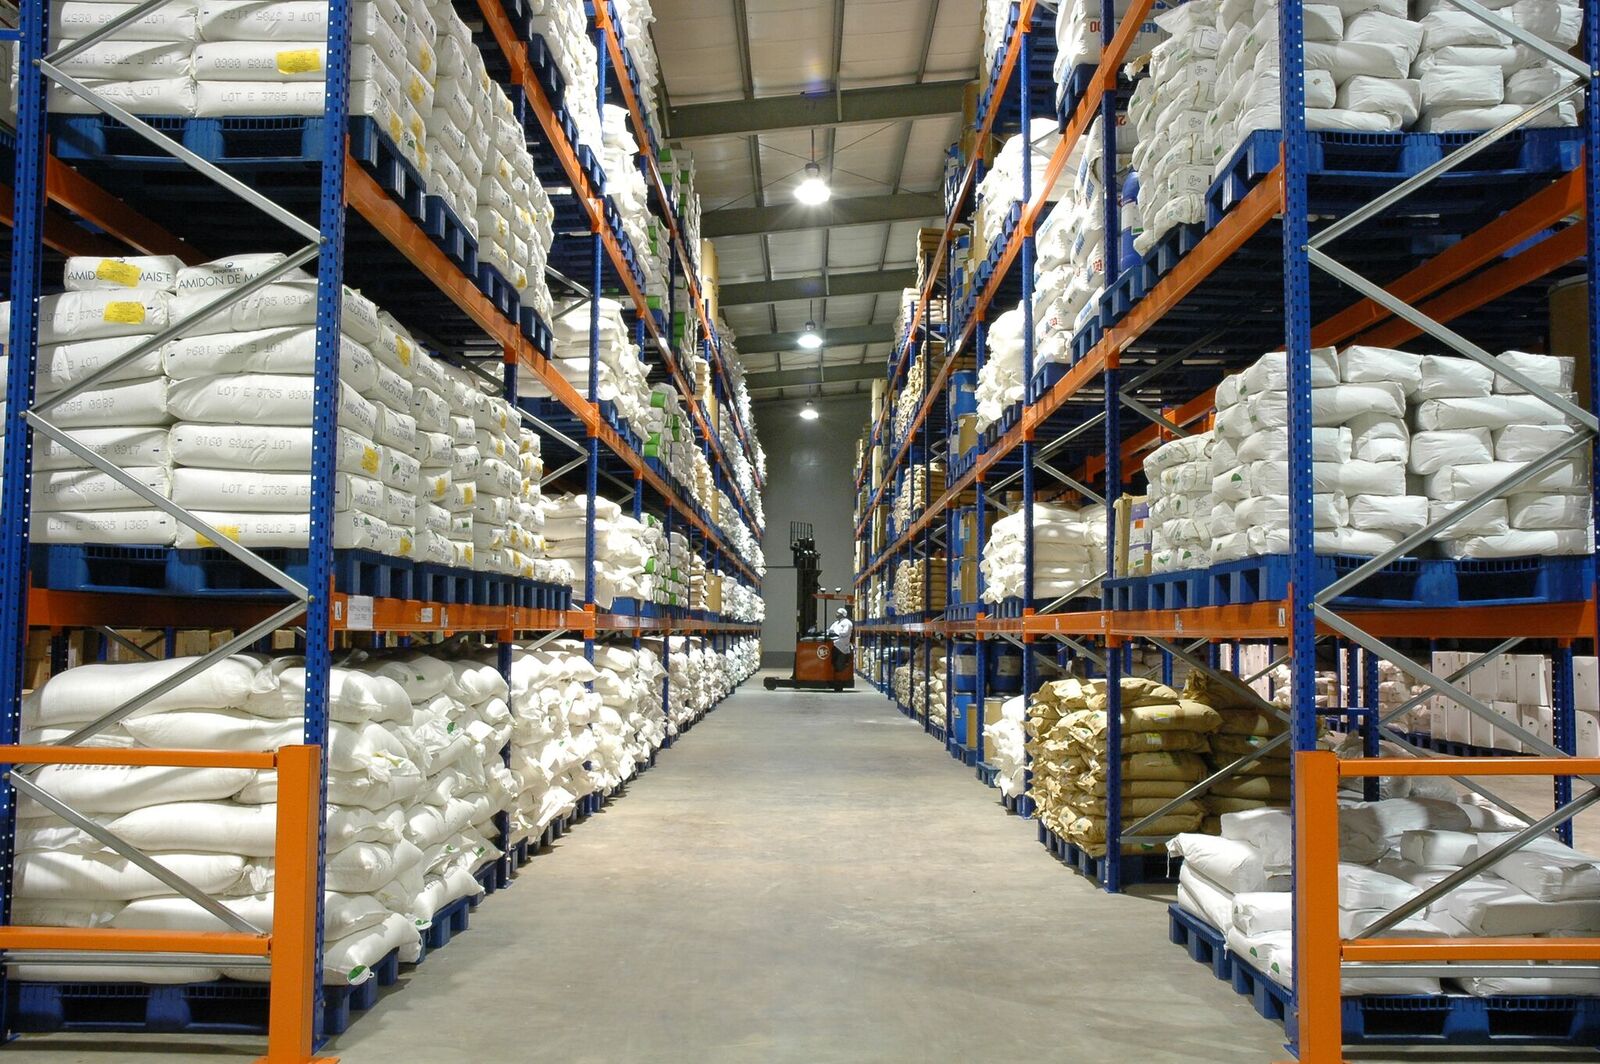 Beximco pharma warehouse. Assets for distribution?